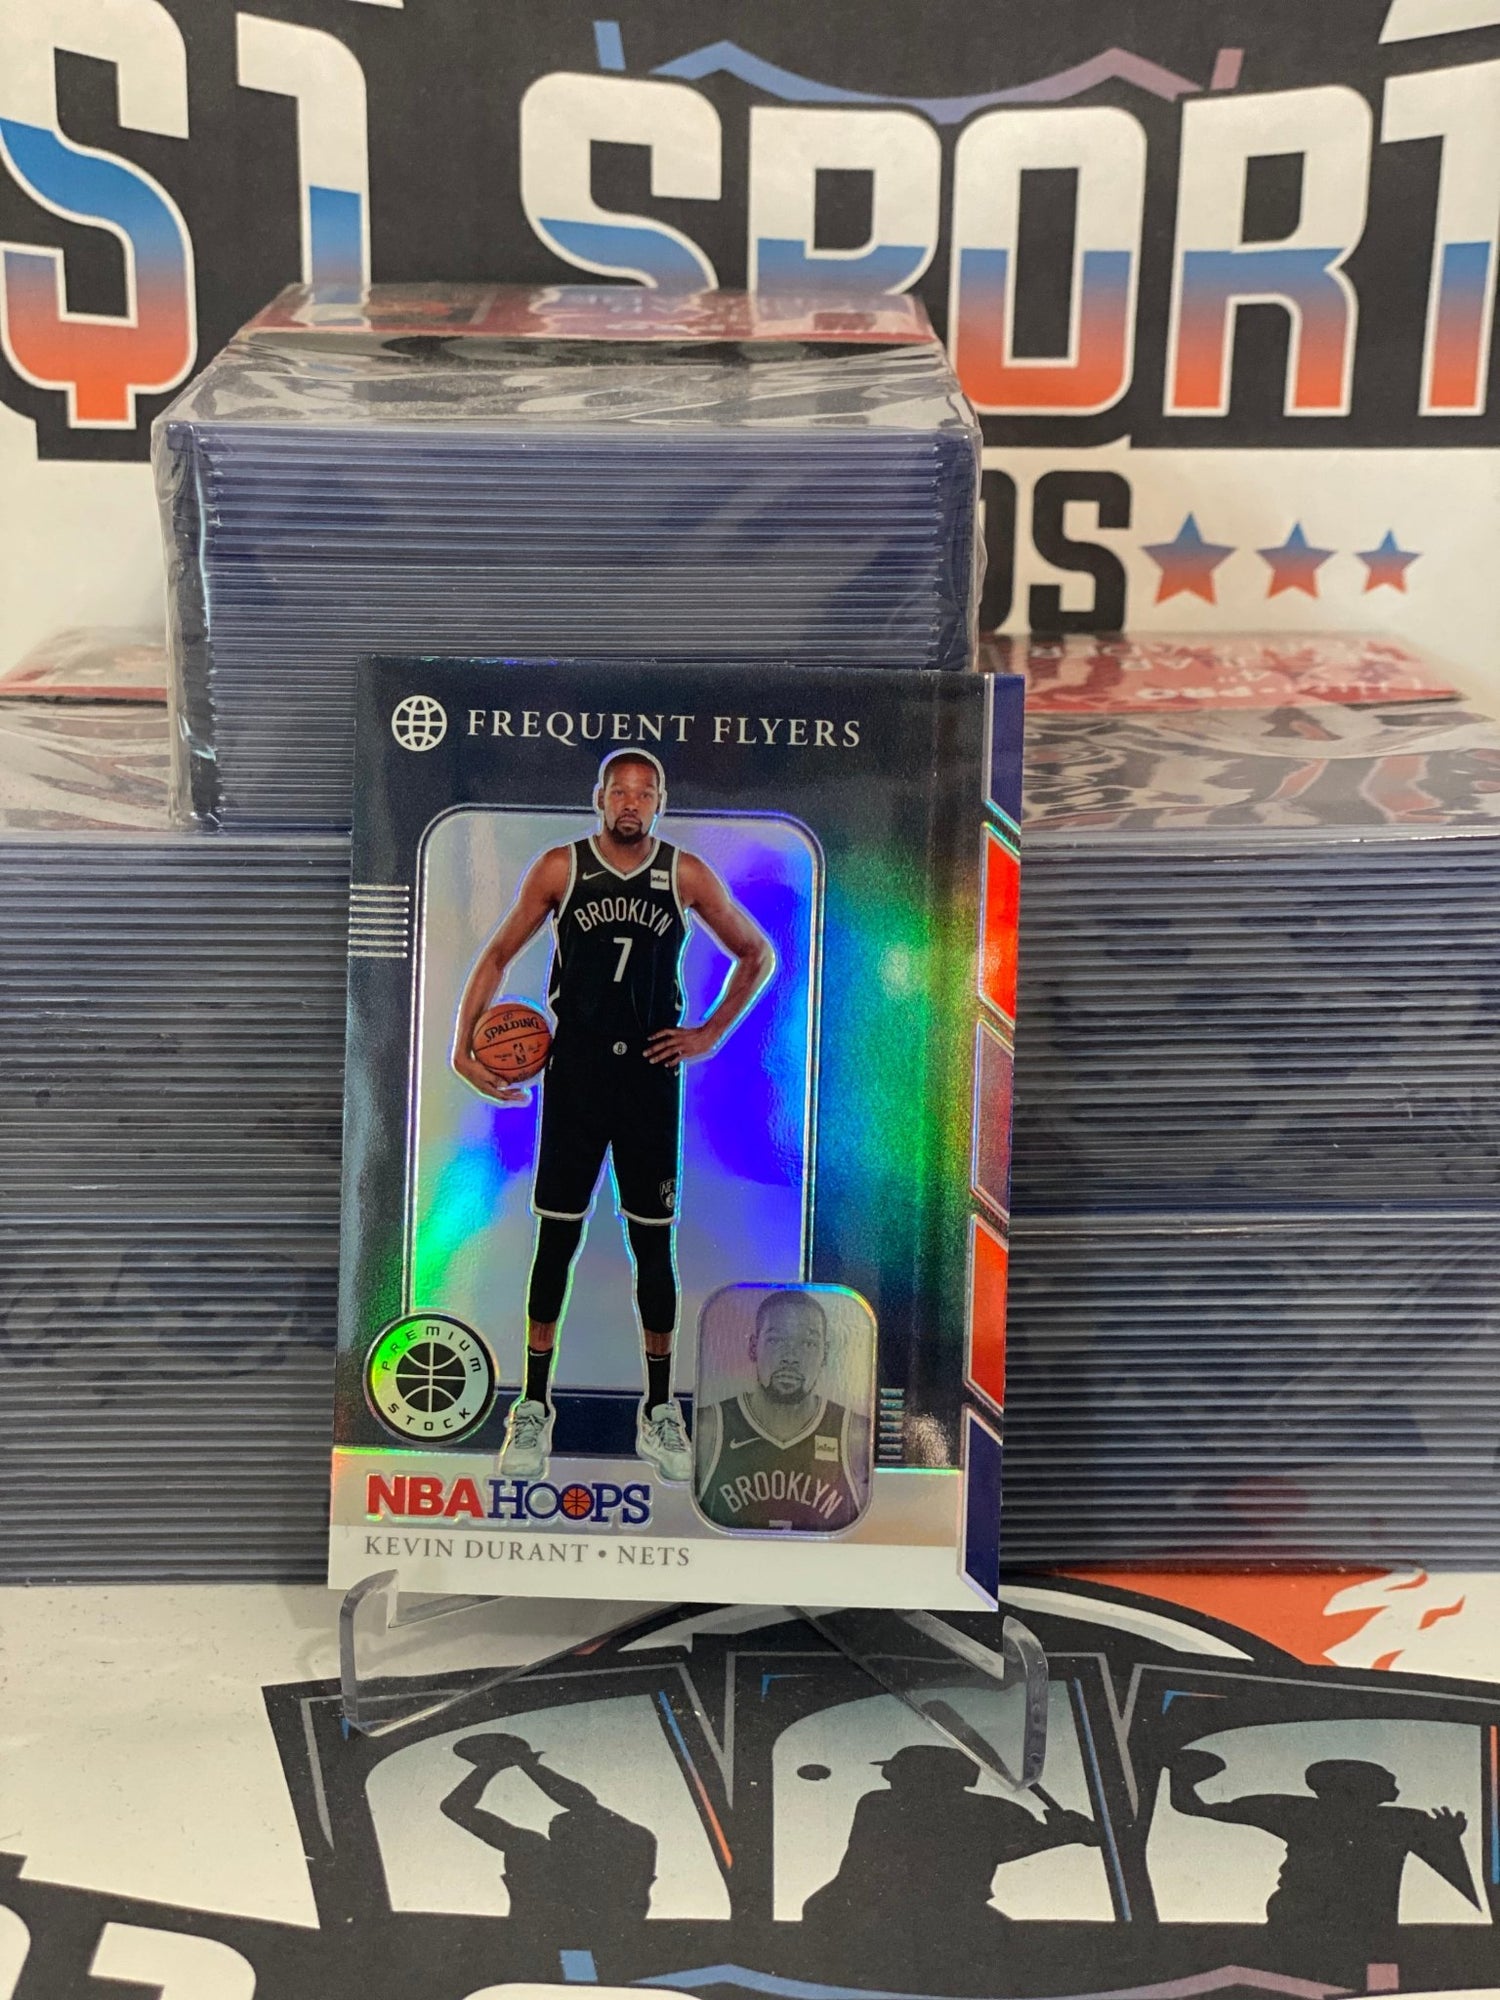 2019 Hoops Premium Stock (Holo Prizm, Frequent Flyers) Kevin Durant #1